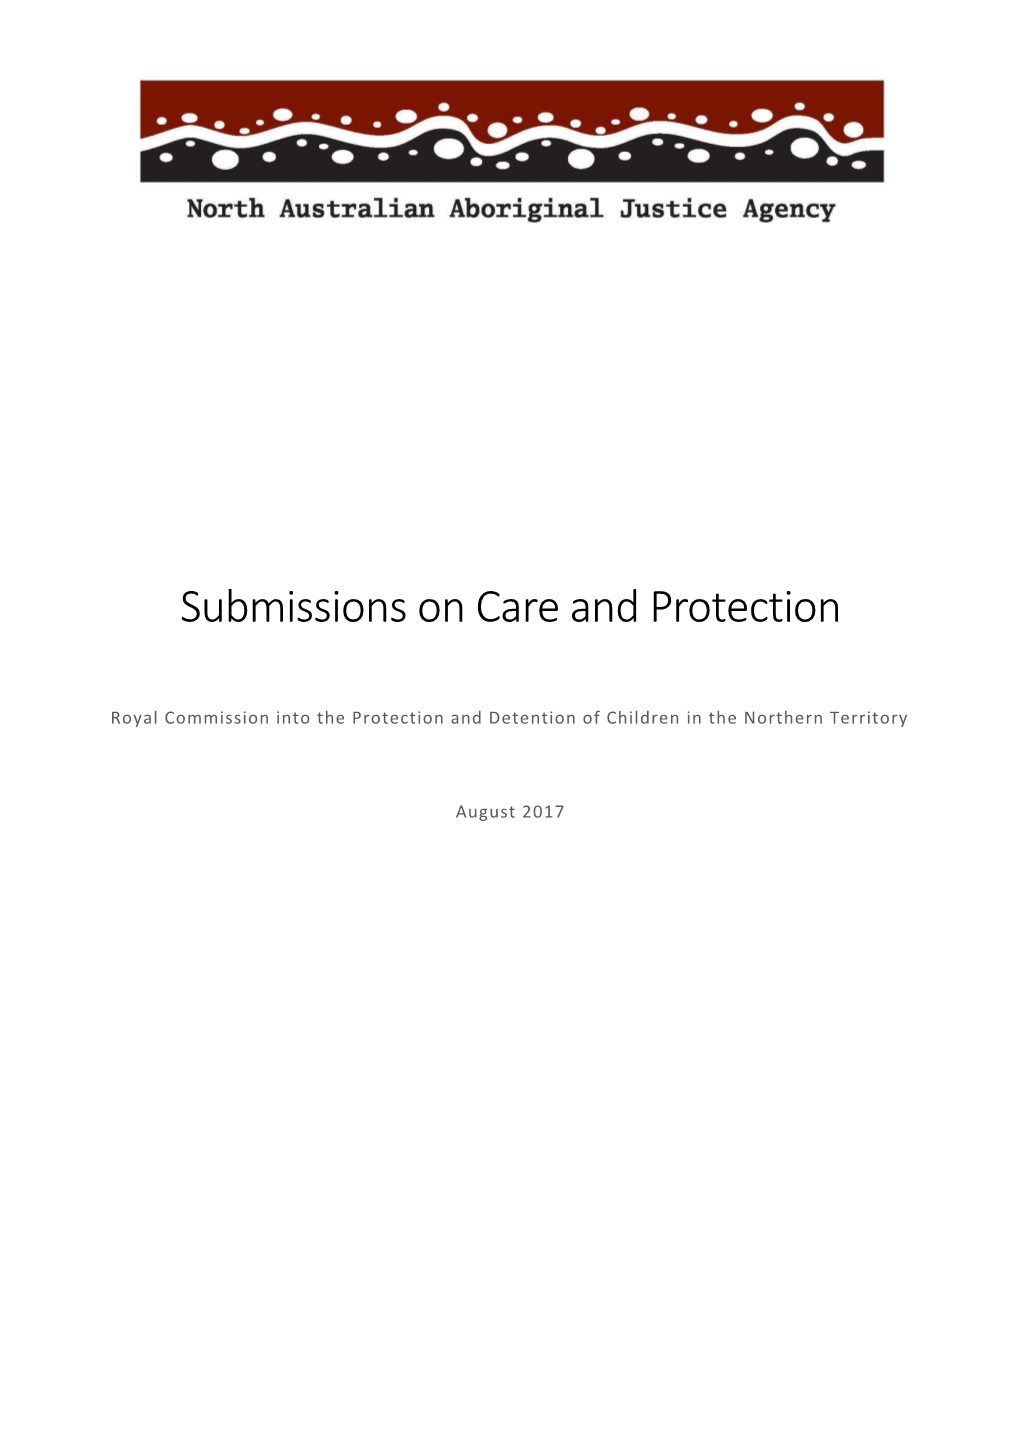 Submissions on Care and Protection Royal Commission Into The